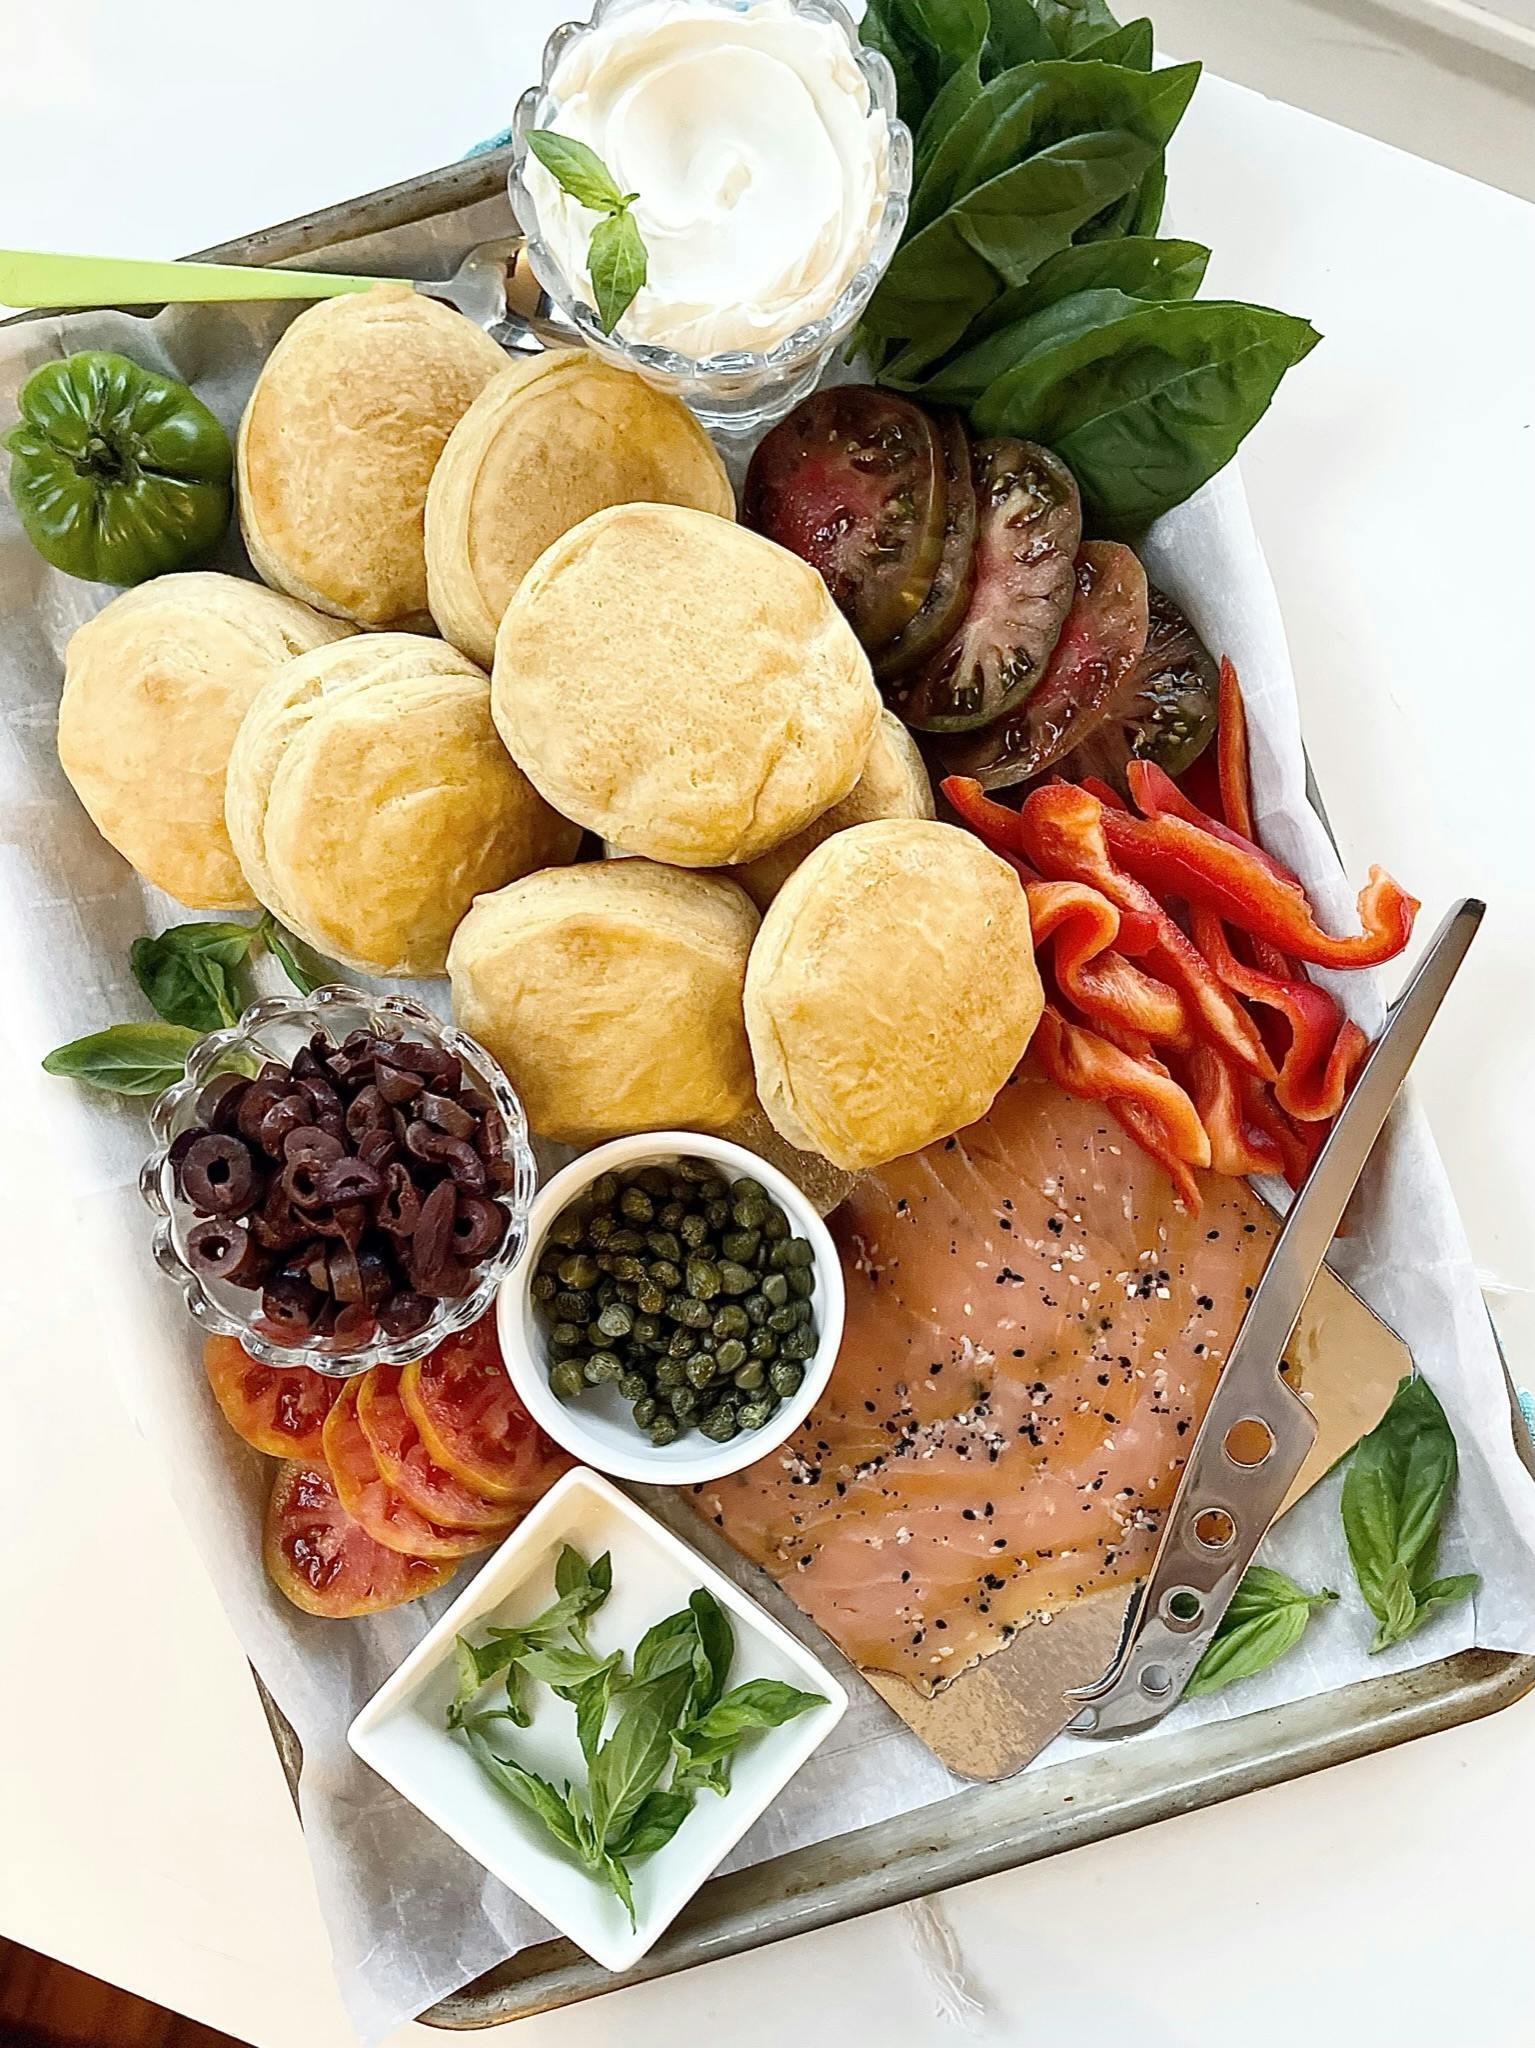 Picture for King's Hawaiian Biscuits + Smoked Salmon Platter